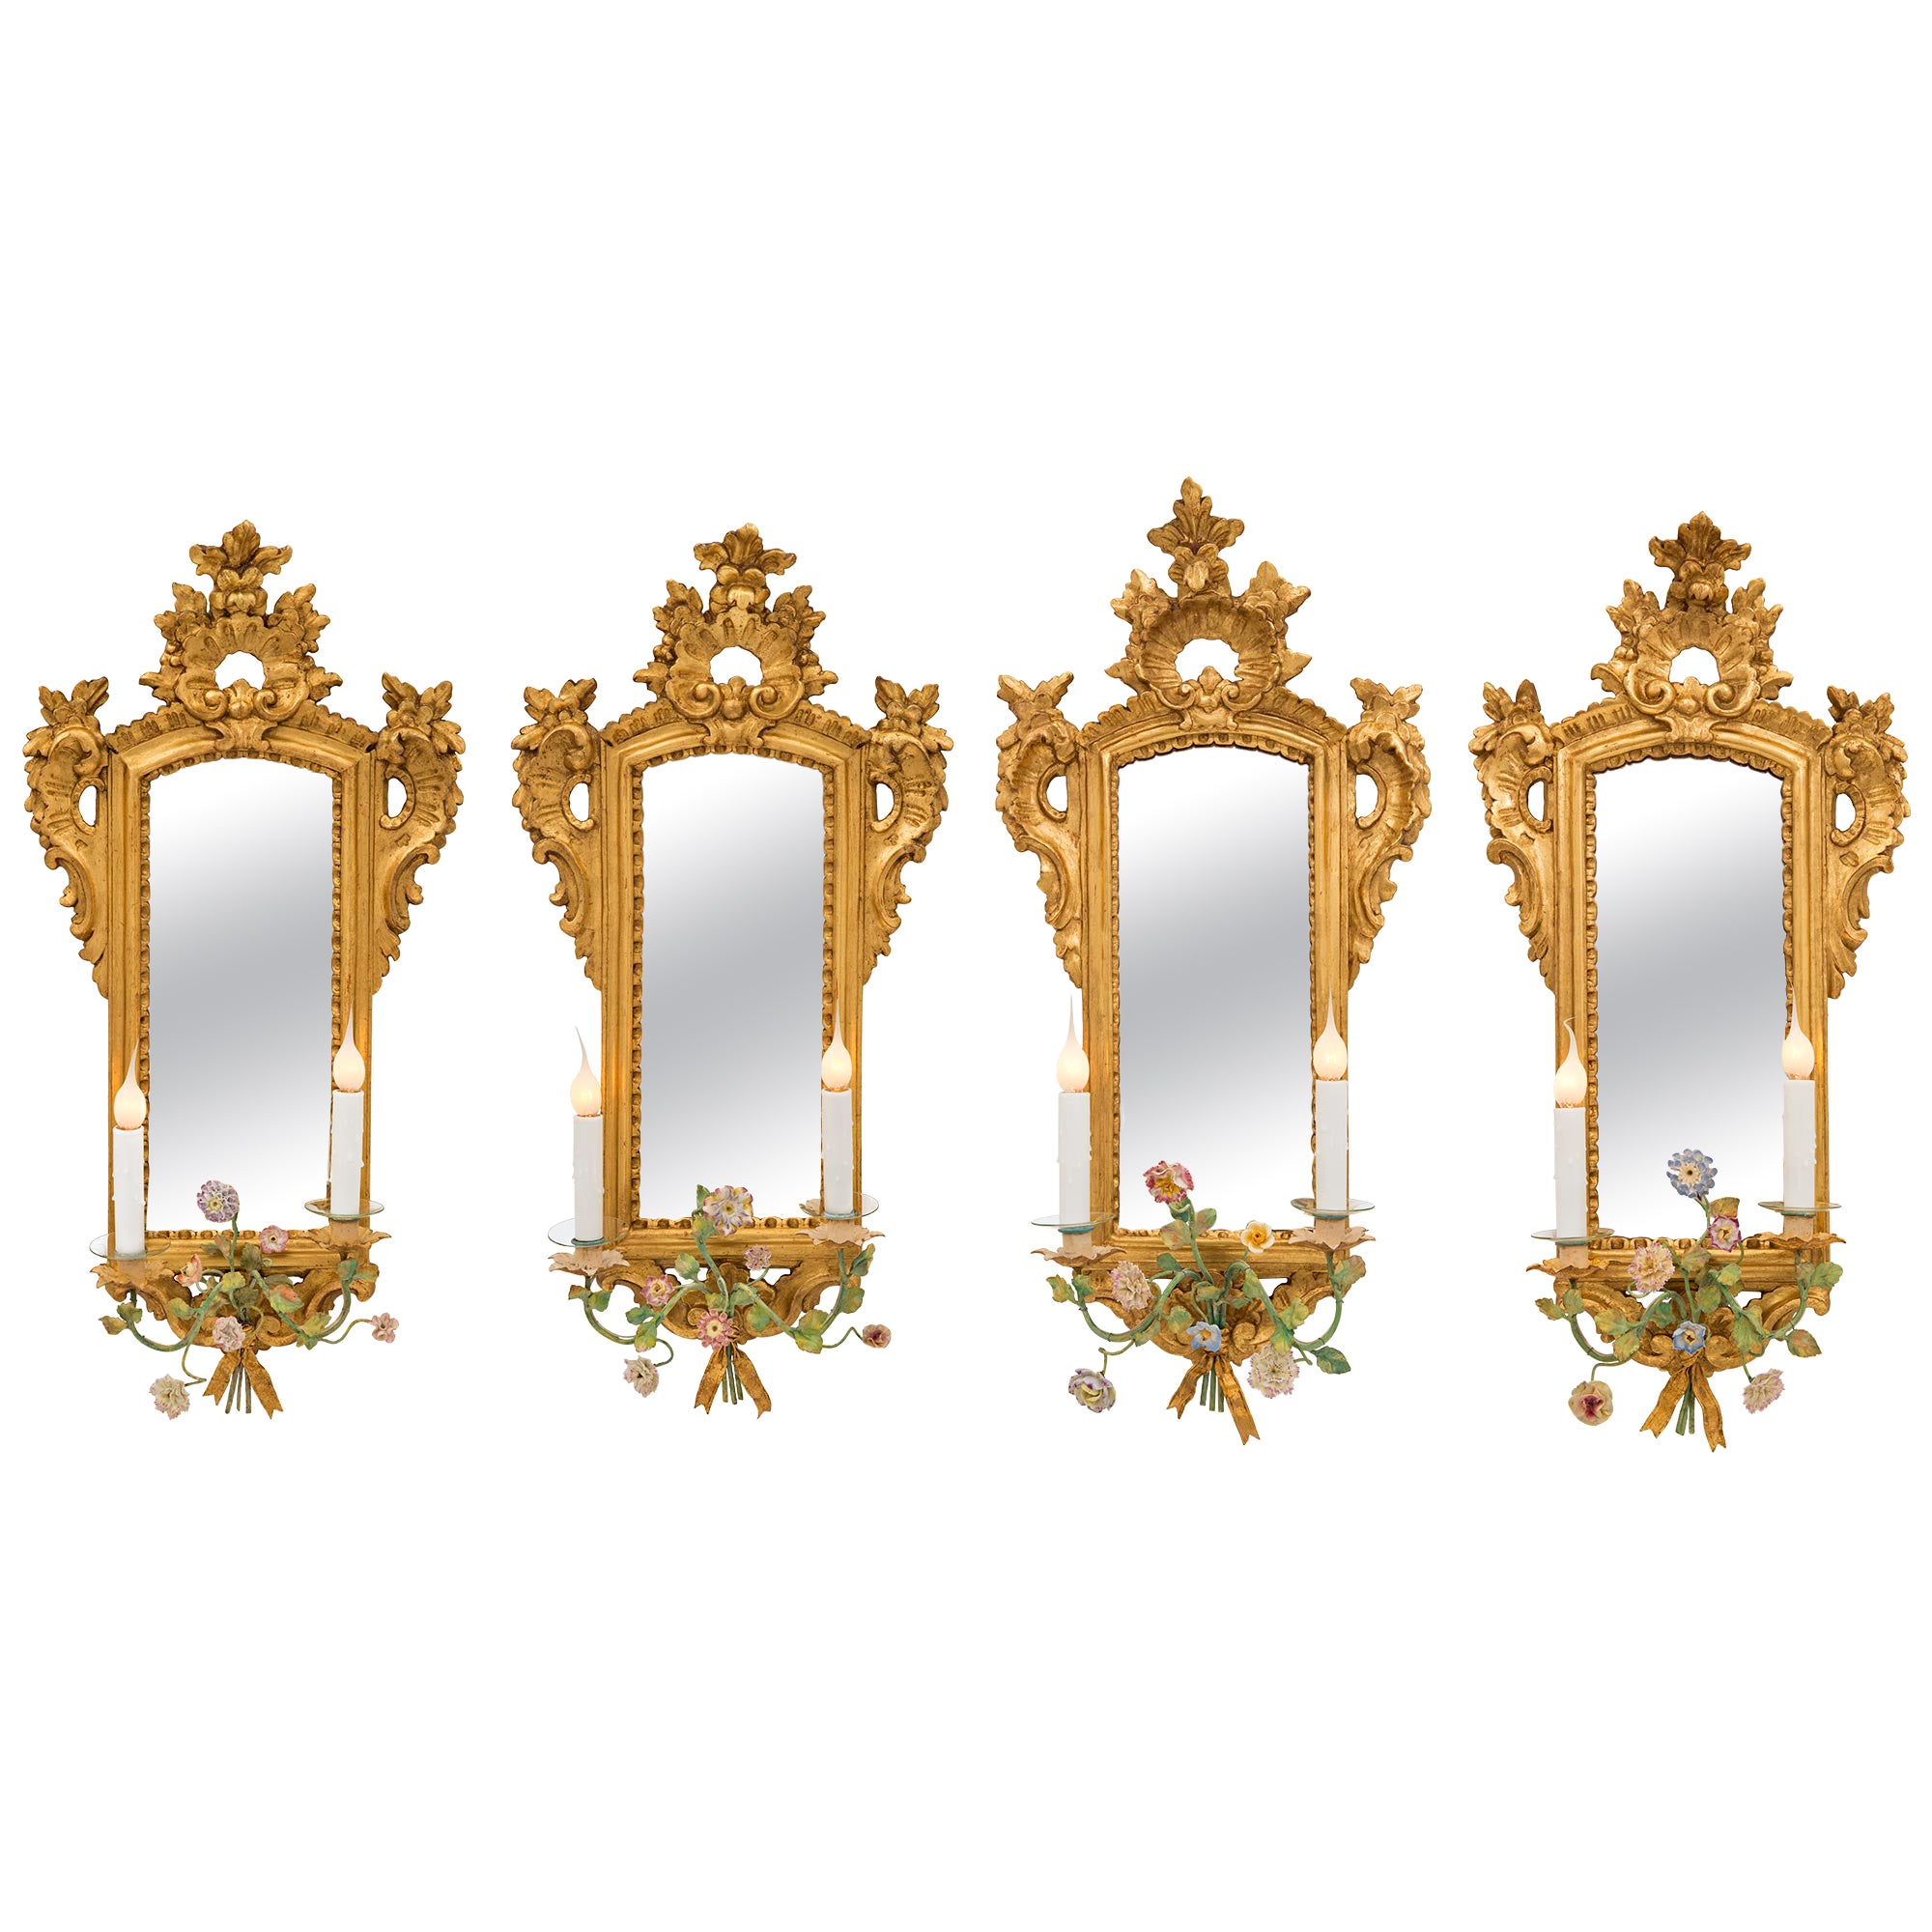 Set of Four Italian 19th Century Louis XV St. Giltwood and Mirrored Sconces